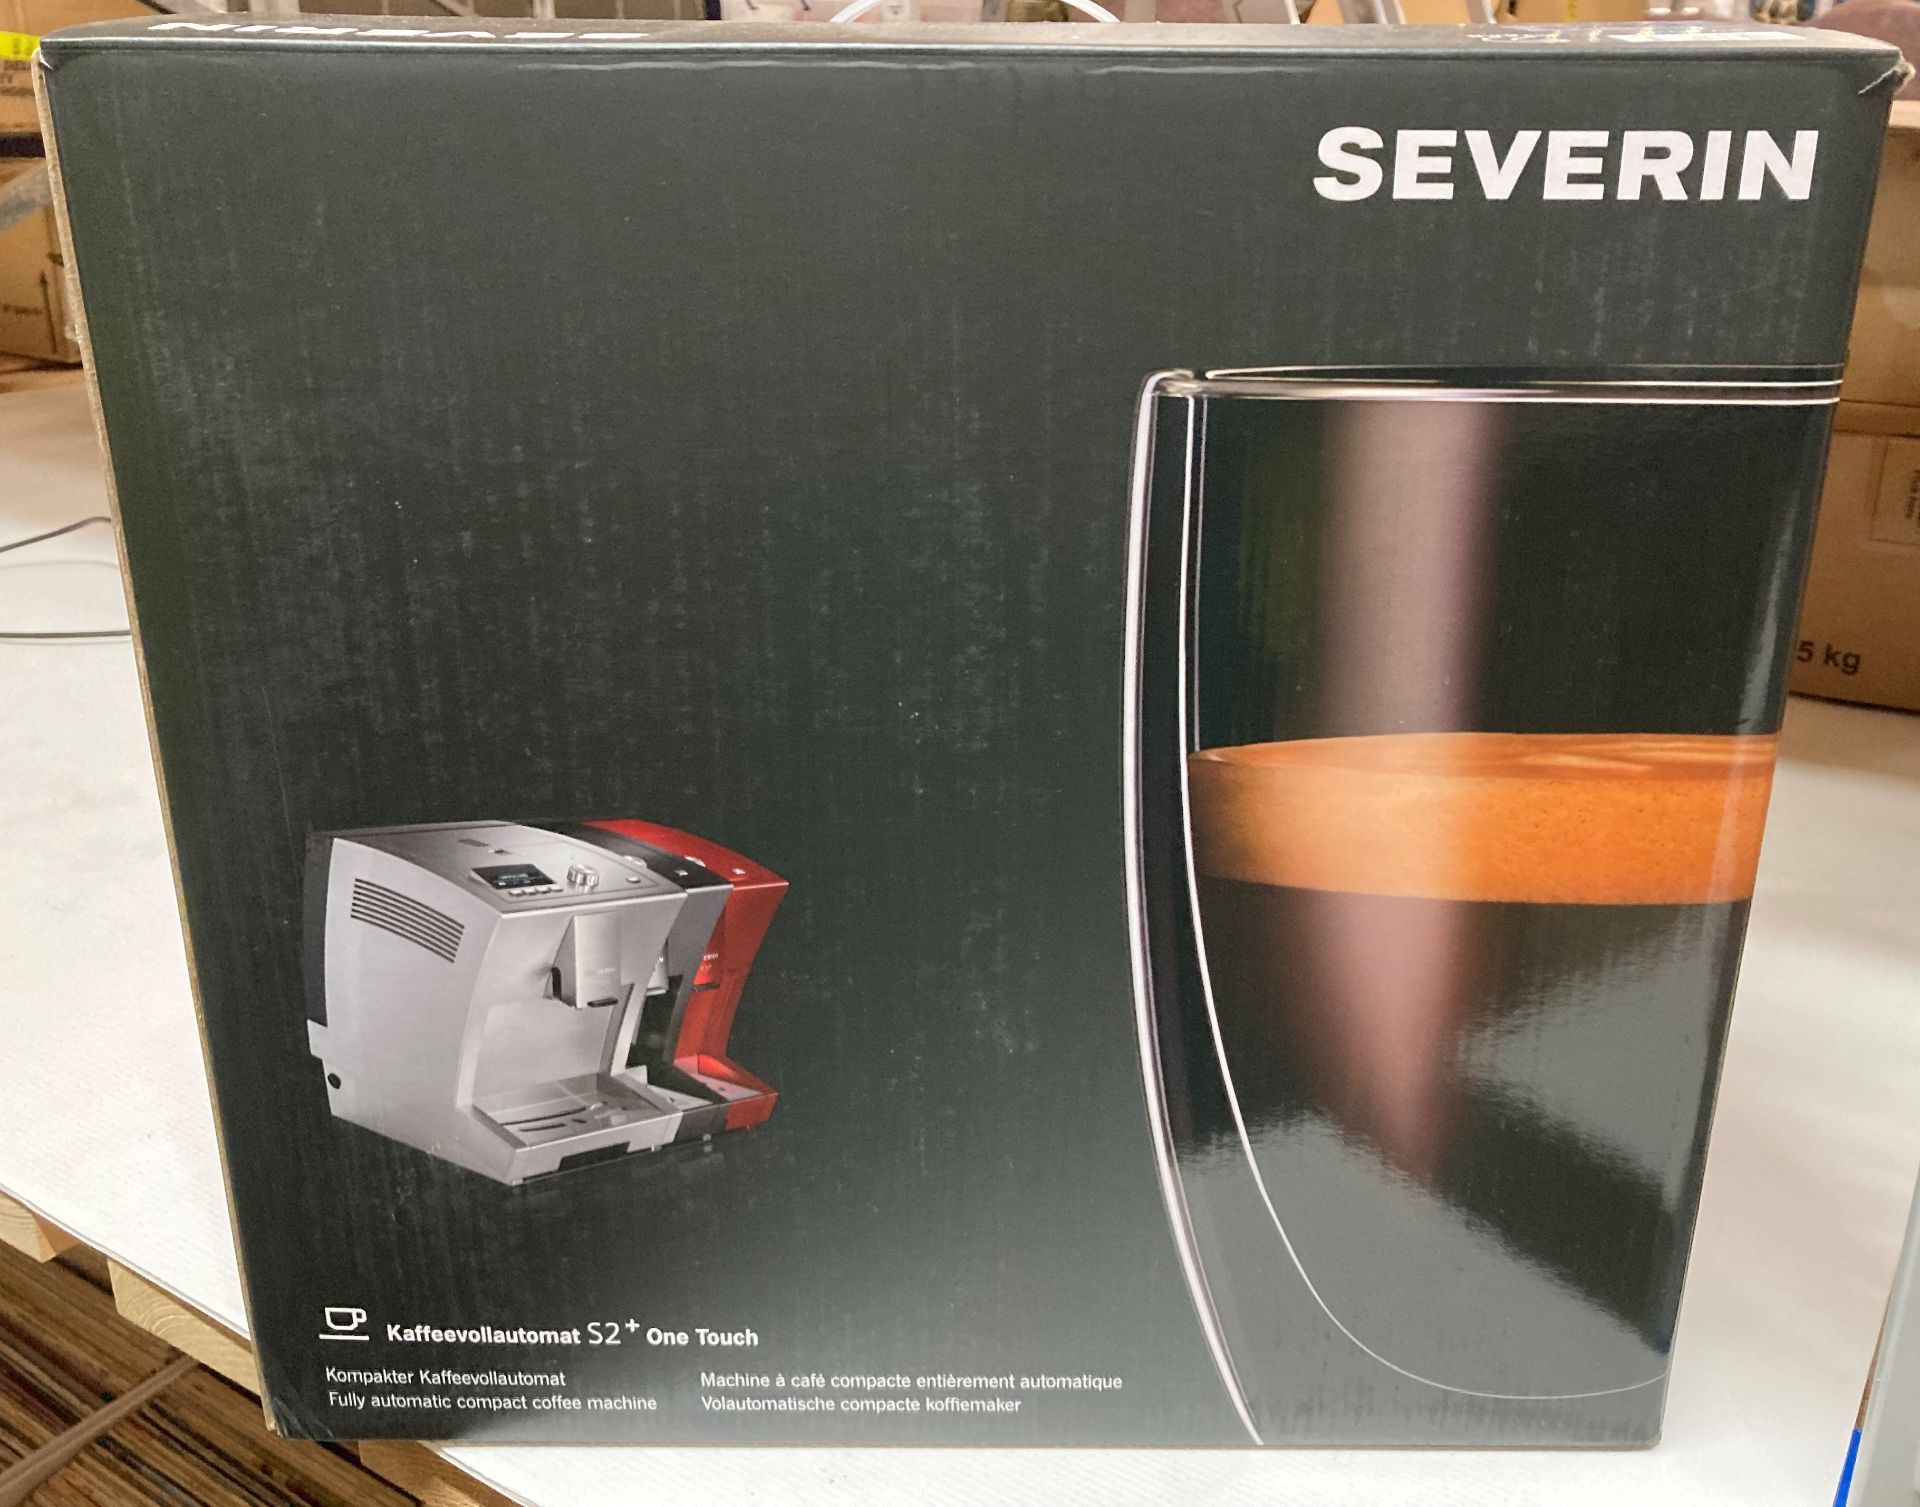 Severin KV8021 one touch fully automatic coffee machine (boxed) - factory sealed,